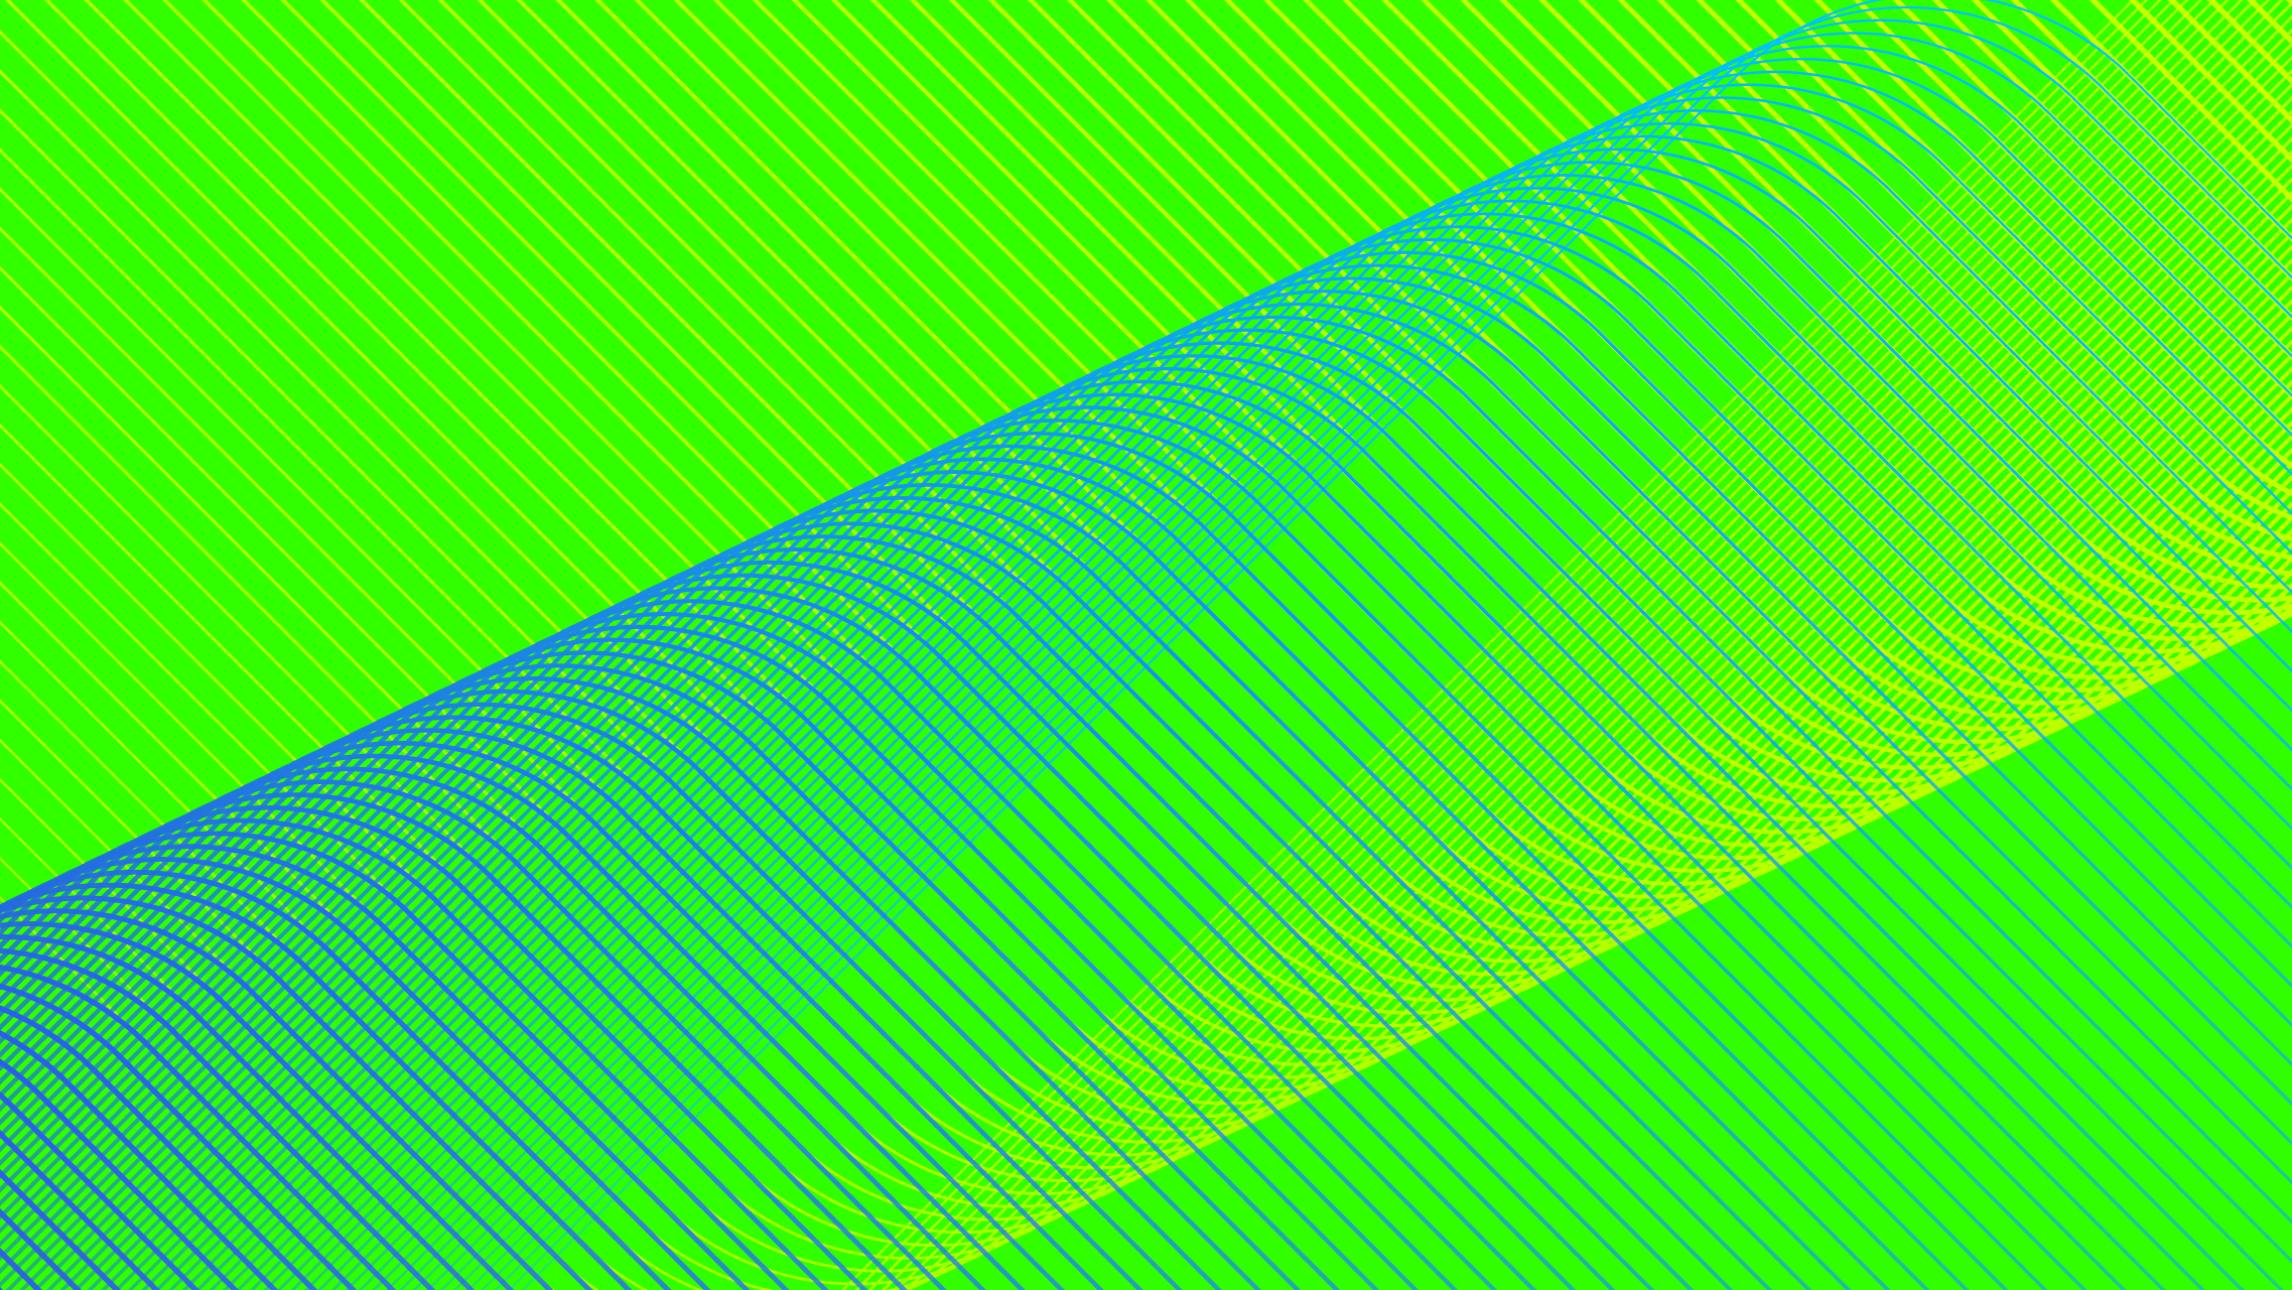 A digital rendering of blue parallel lines and yellow parallel lines that bend and curve over a lime green background.